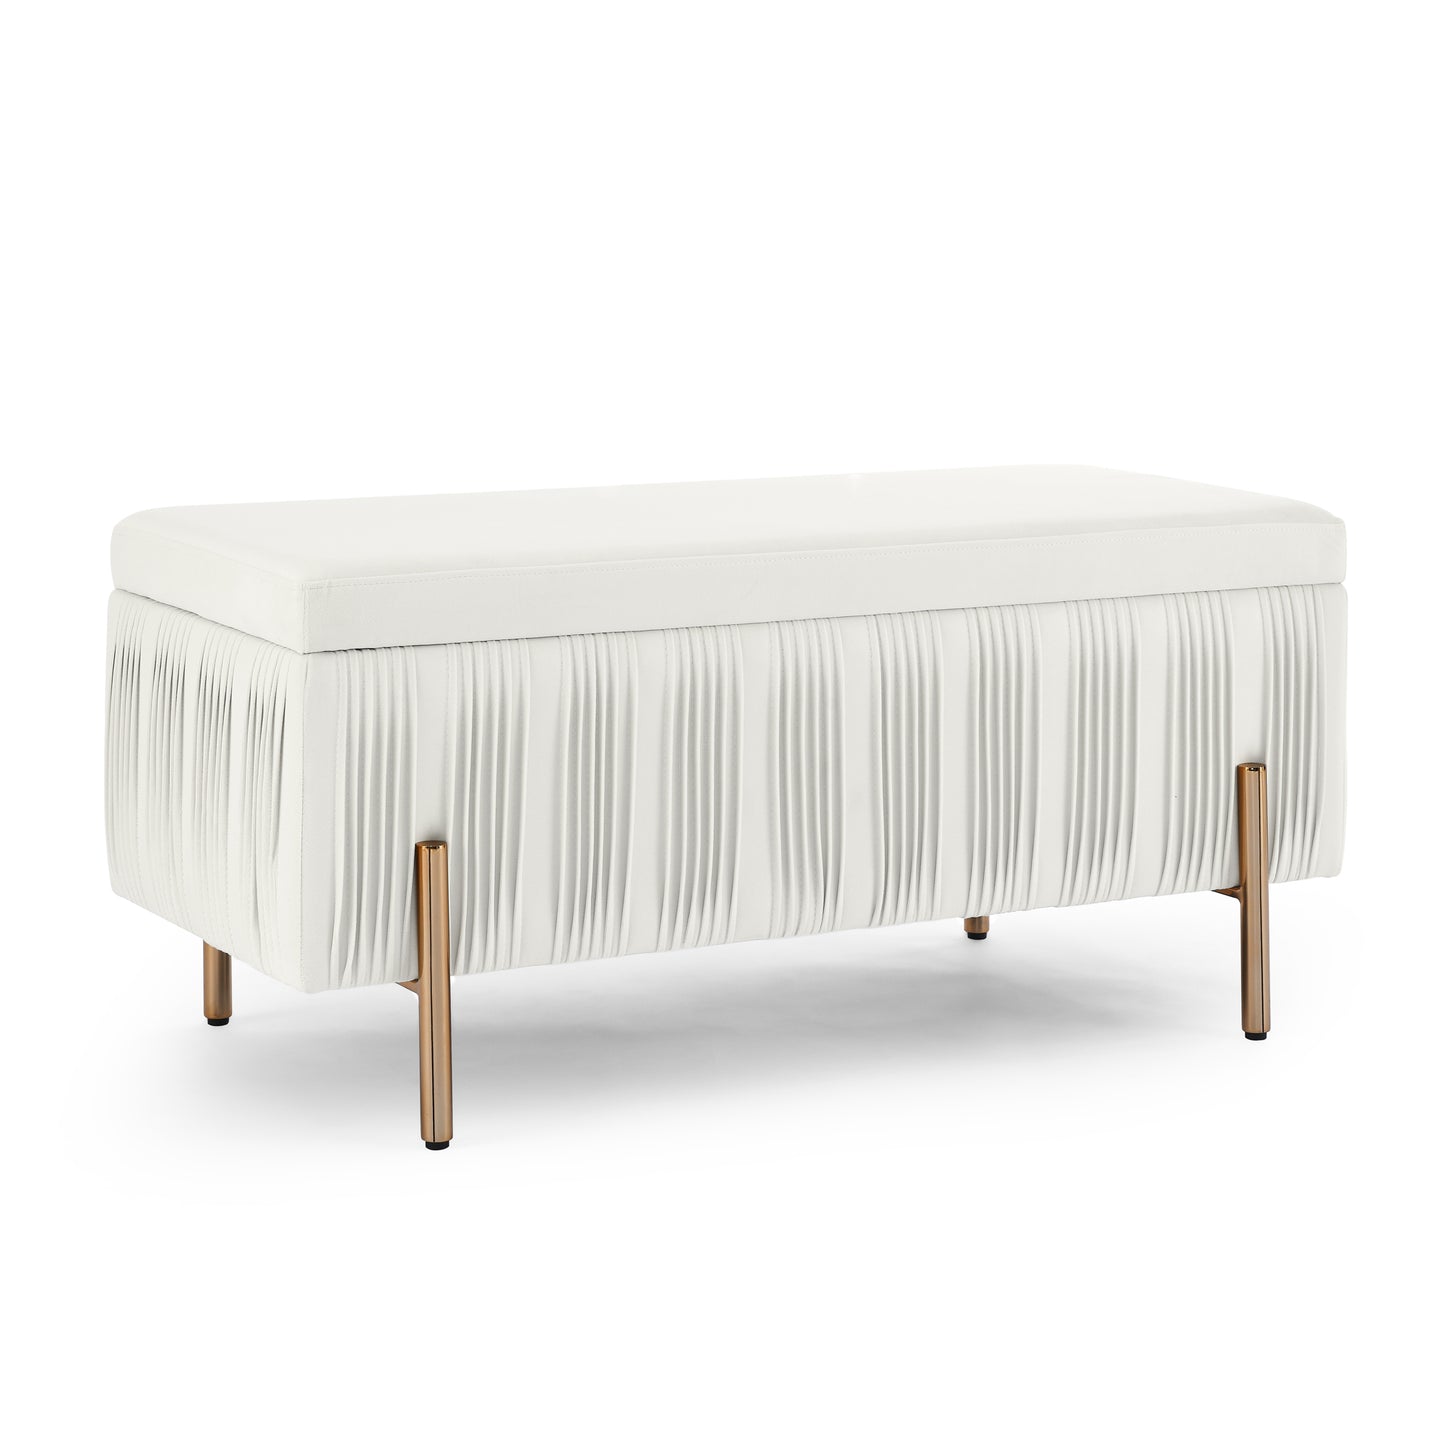 Maple Seating Bench (beige)